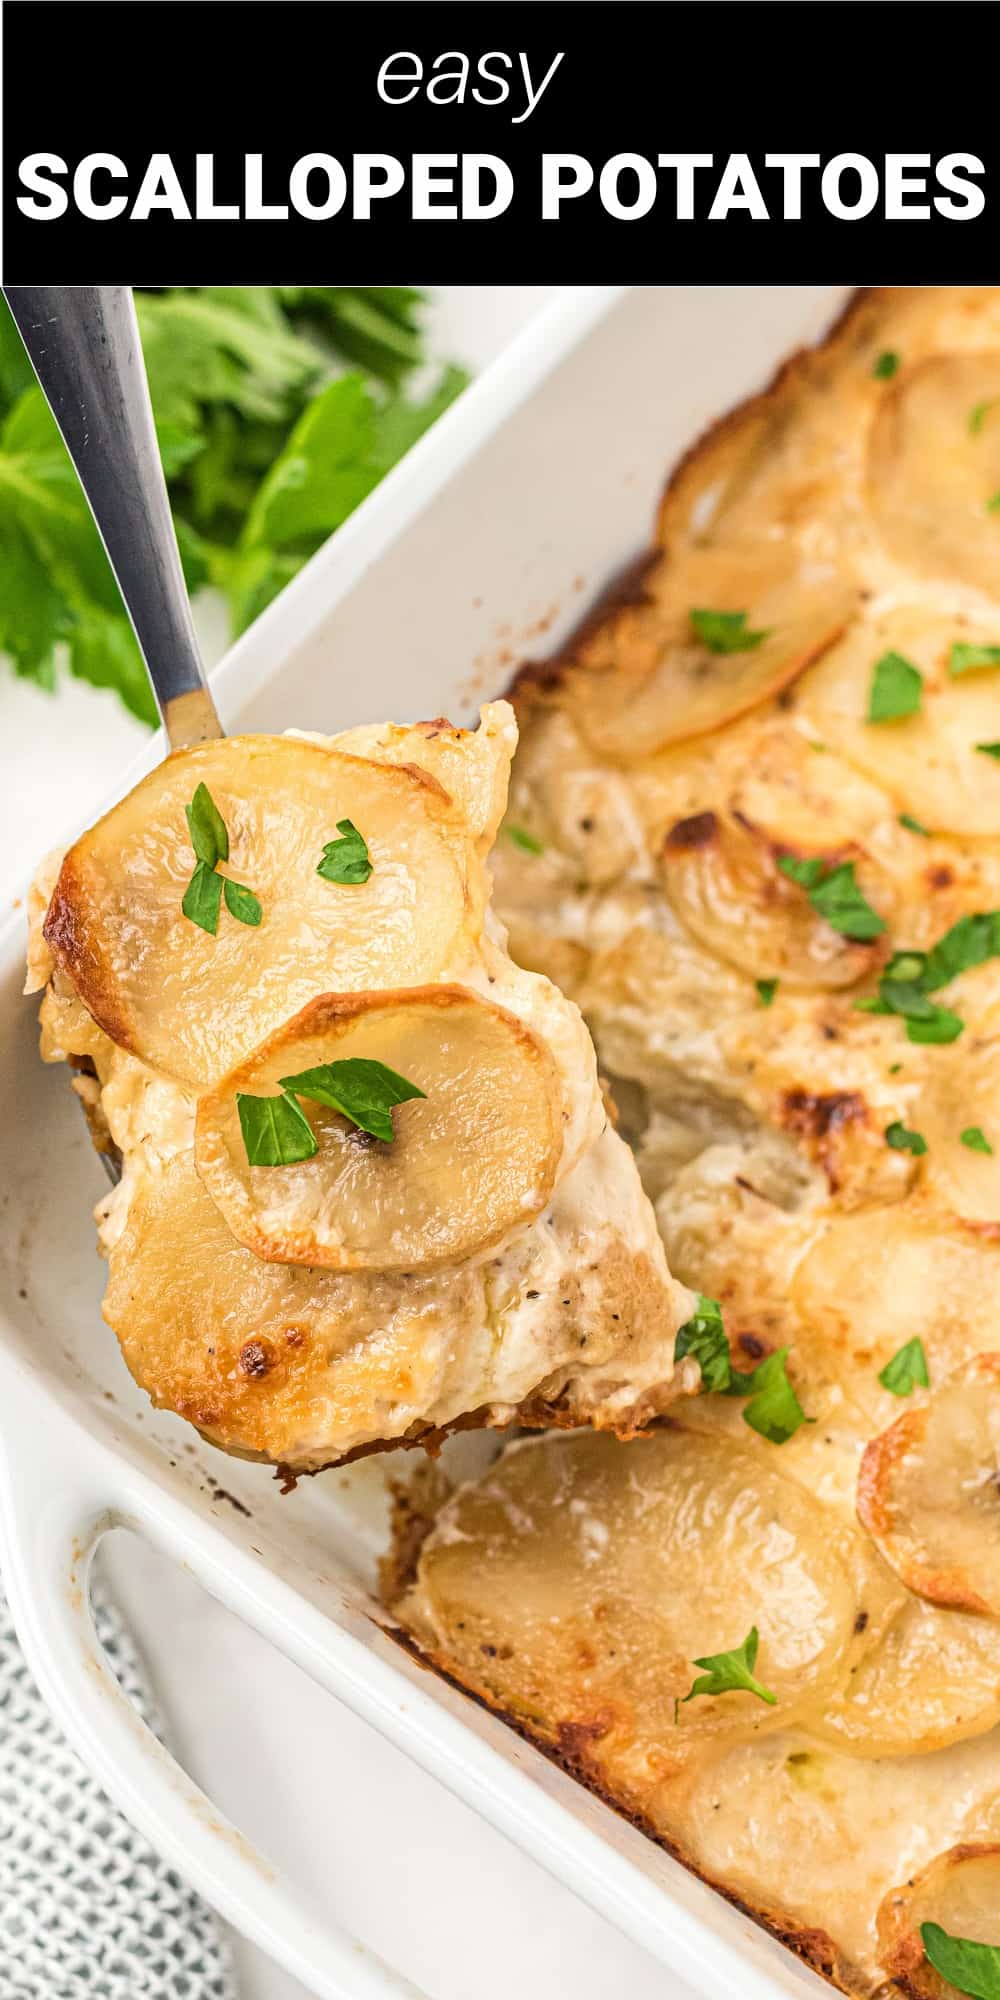 Our Scalloped Potatoes recipe is the perfect side dish for just about every kind of meal. Made using heavy cream, onions, and potatoes make this a creamy potato side dish perfect for a holiday or weeknight meal.